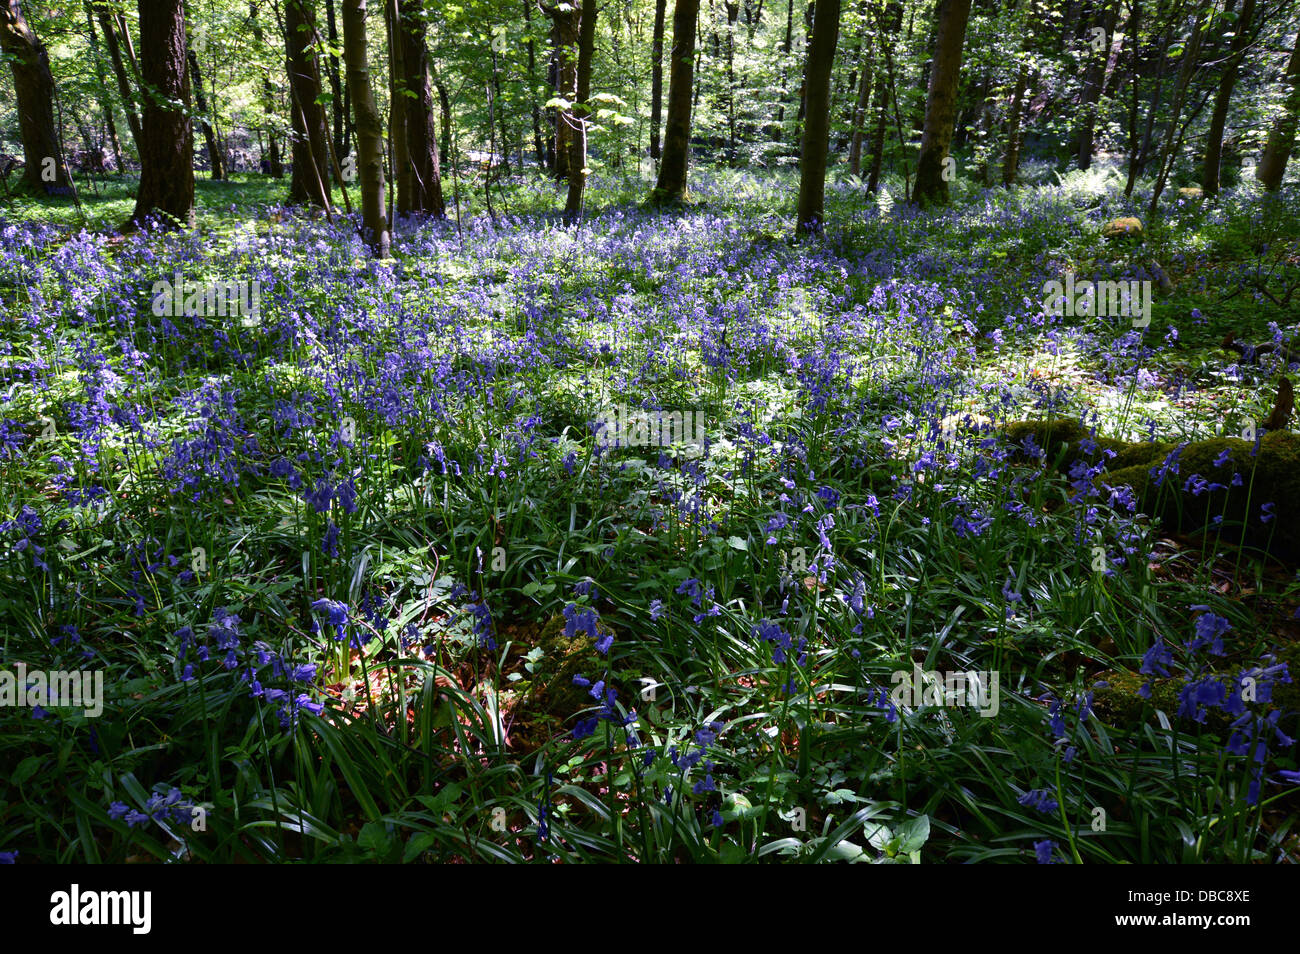 Bluebells & Trees in Strid Wood part of the Dales Way Long Distance Footpath Wharfedale Yorkshire Stock Photo